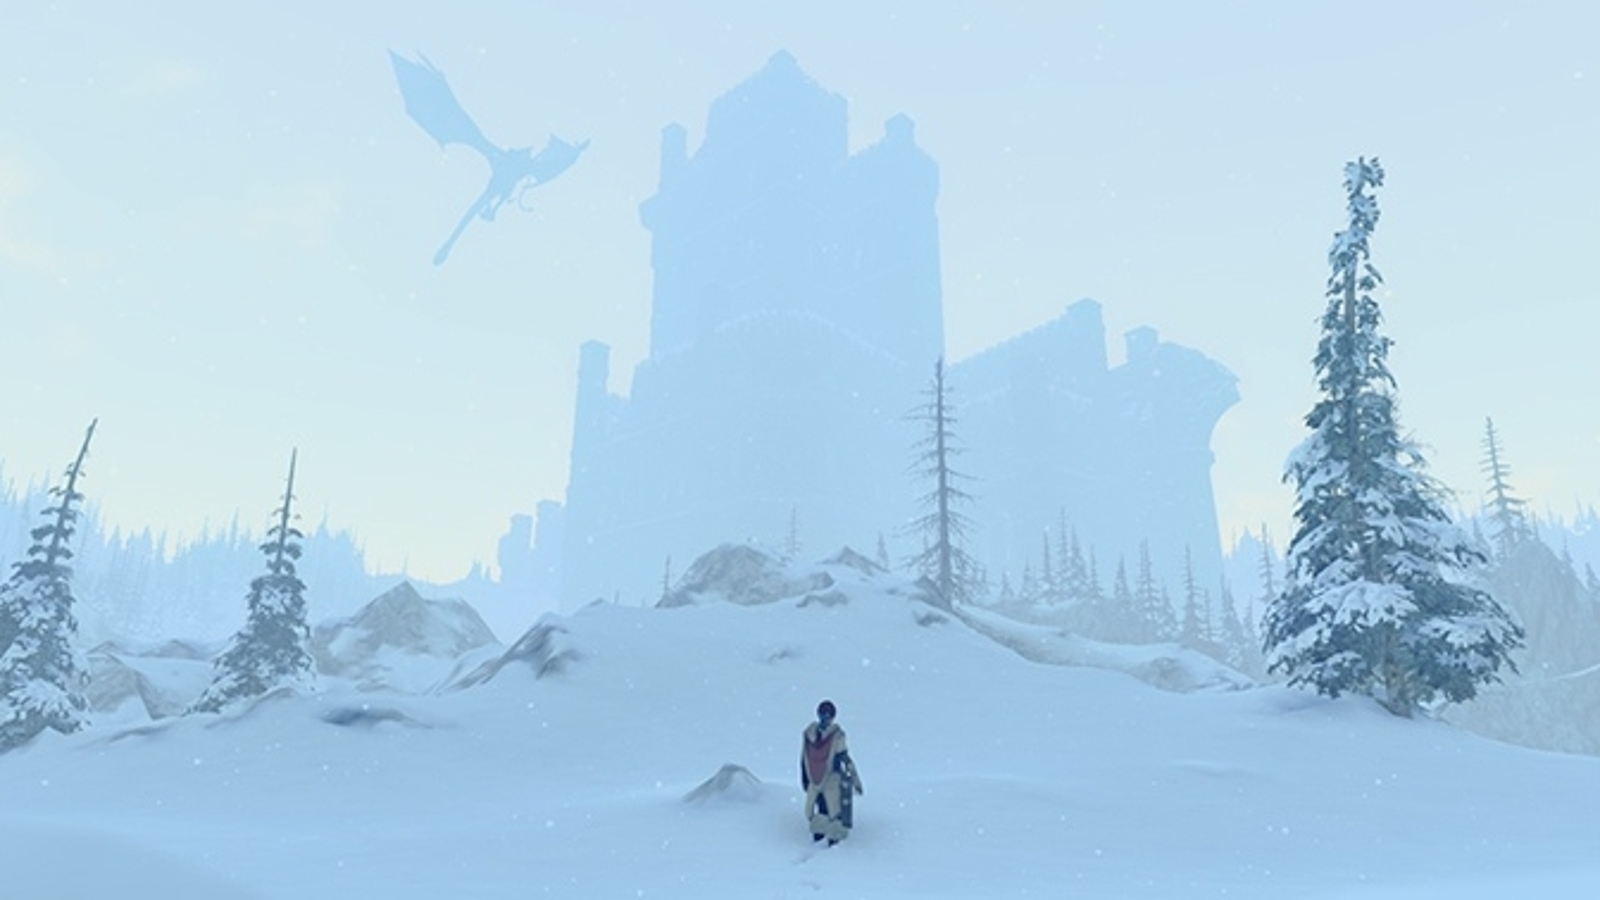 Shadow of the Colossus-inspired Praey for the Gods enters Steam